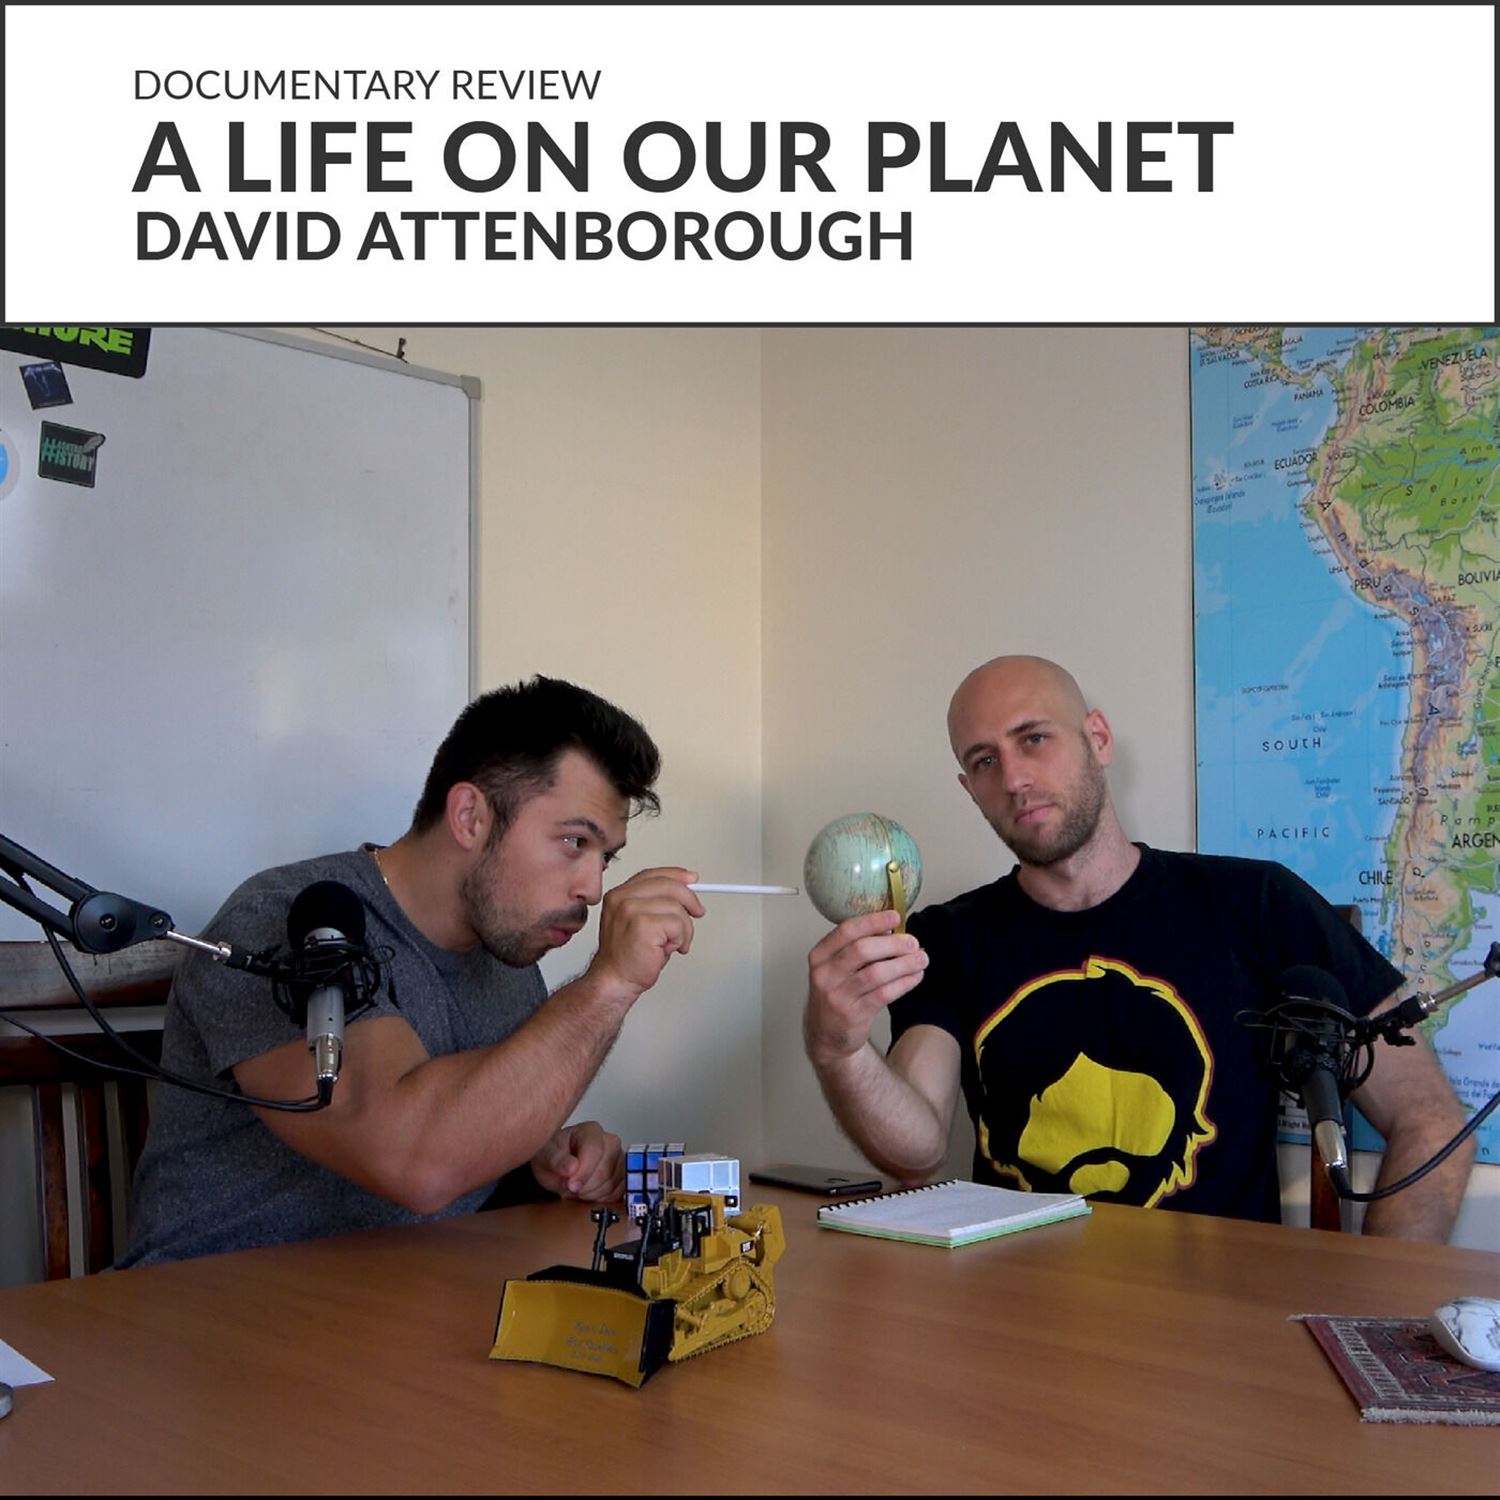 A Life On Our Planet (David Attenborough) - Documentary Review